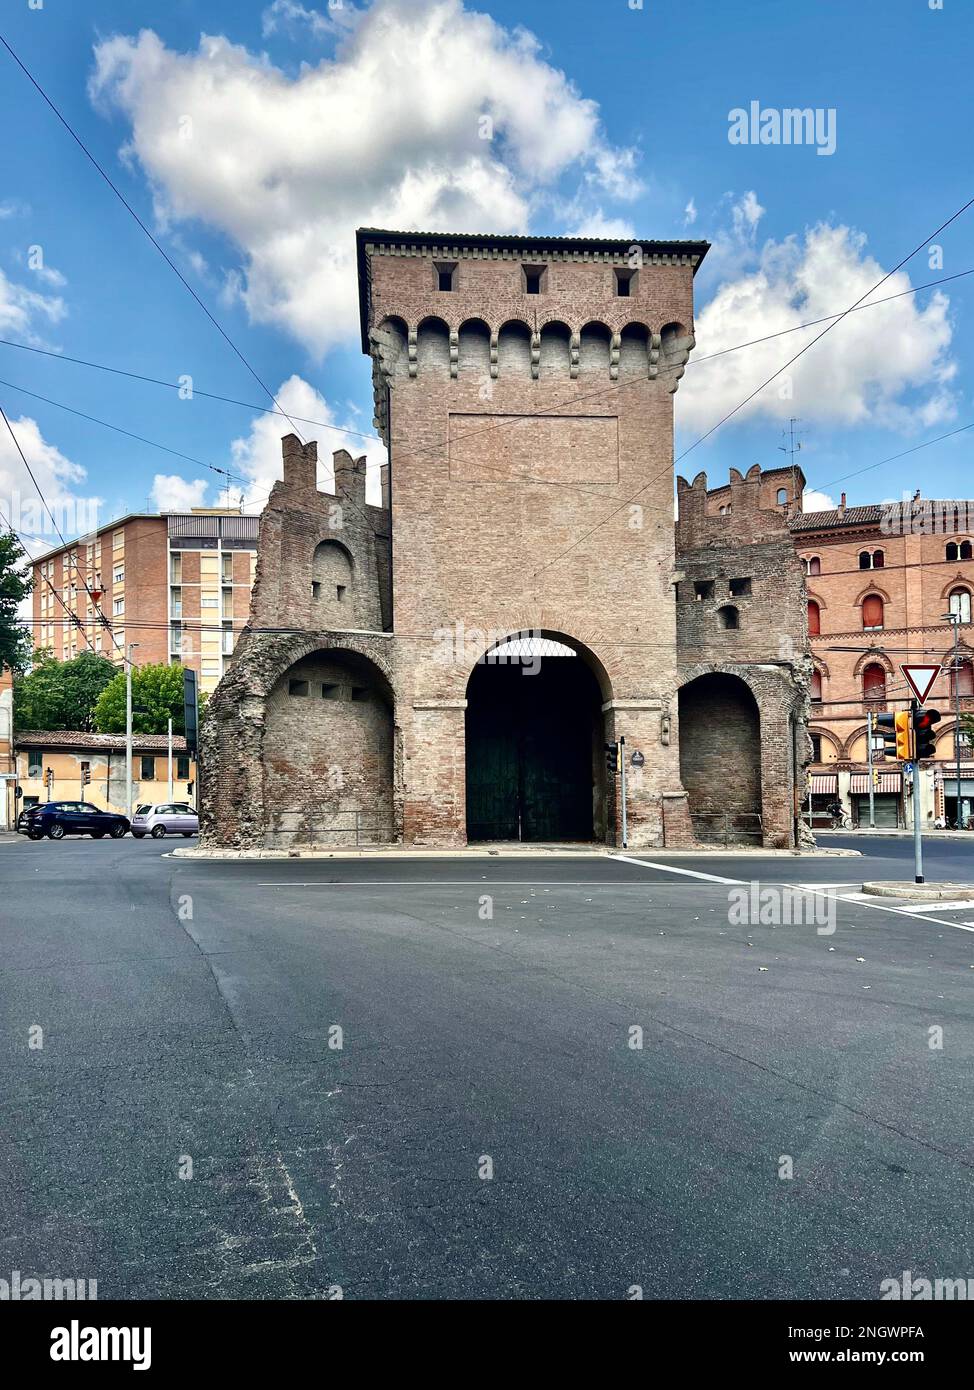 Positioned on the main raod of the ancient via Emilia, the 13th century Porta San Felice stands as an island in the middle of a busy intersection in B Stock Photo